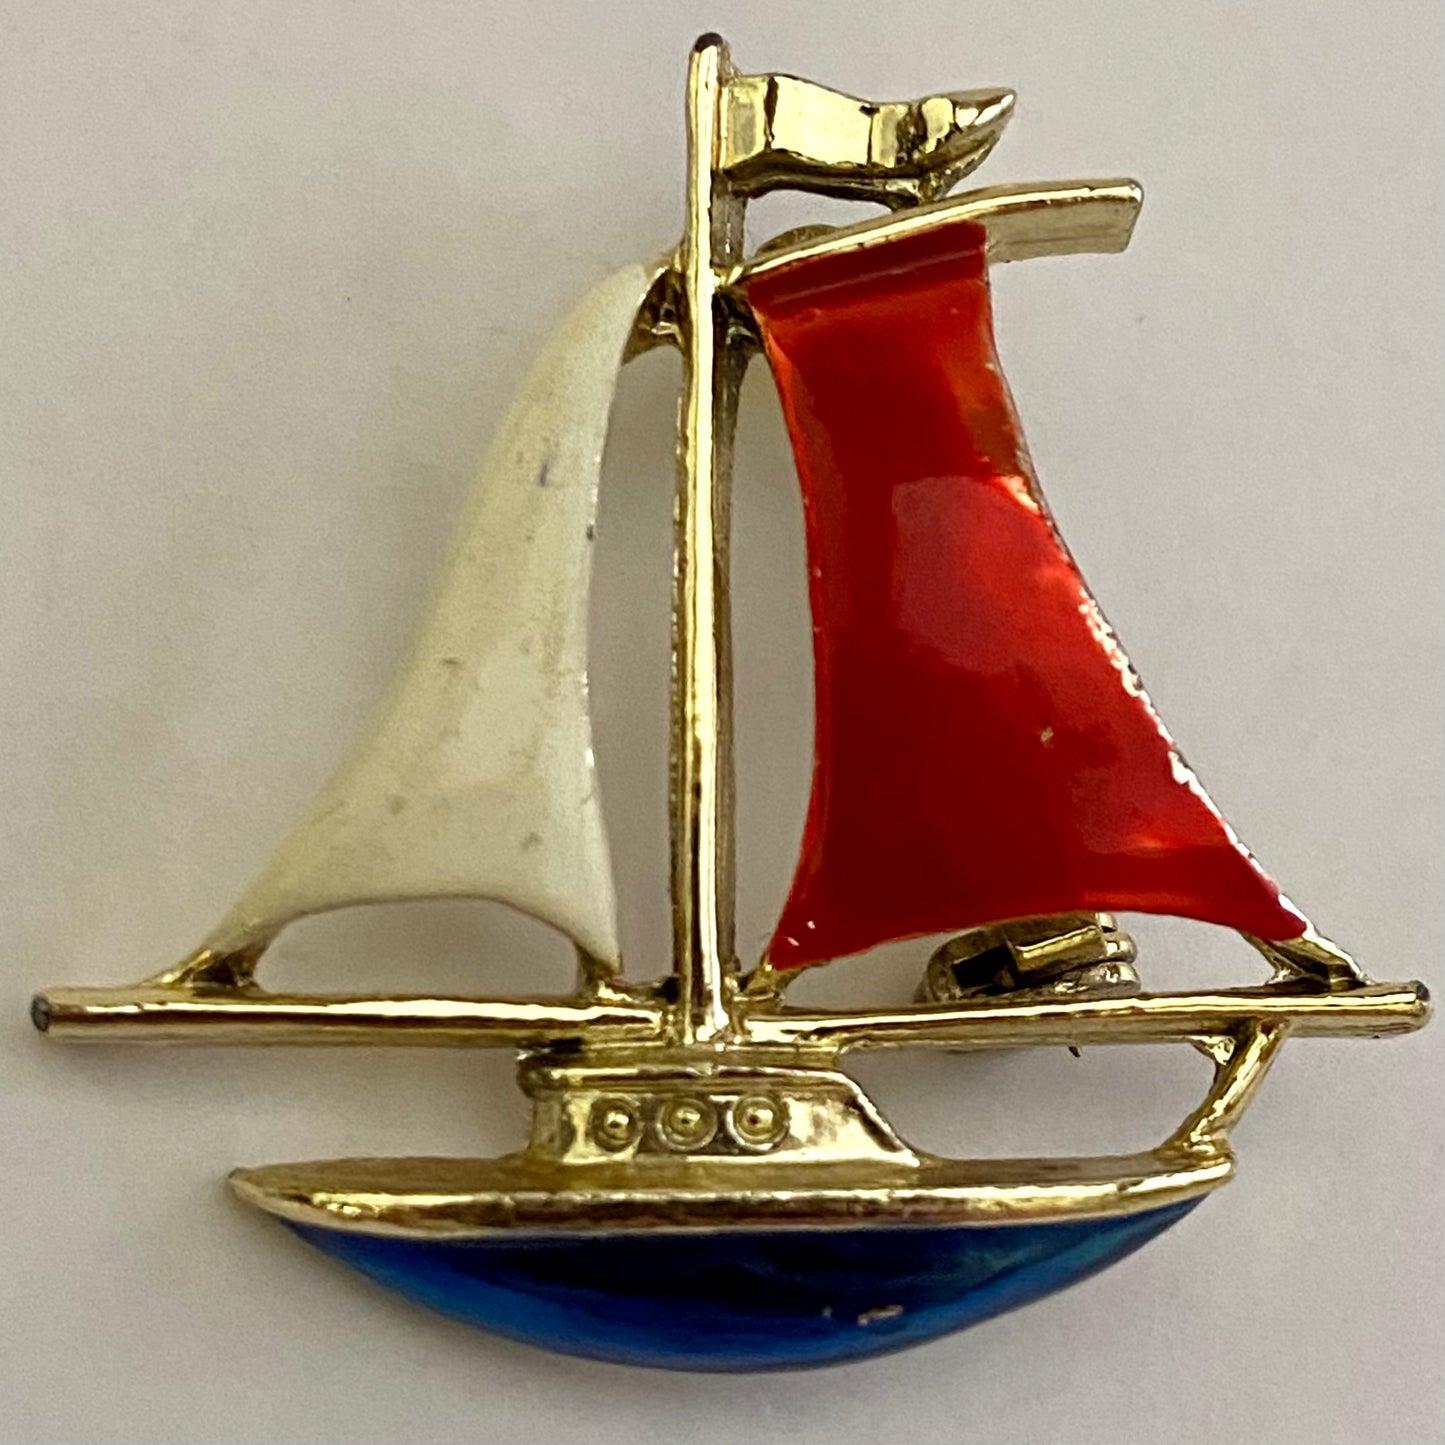 Late 60s/ Early 70s Gerry's Sail Boat Brooch